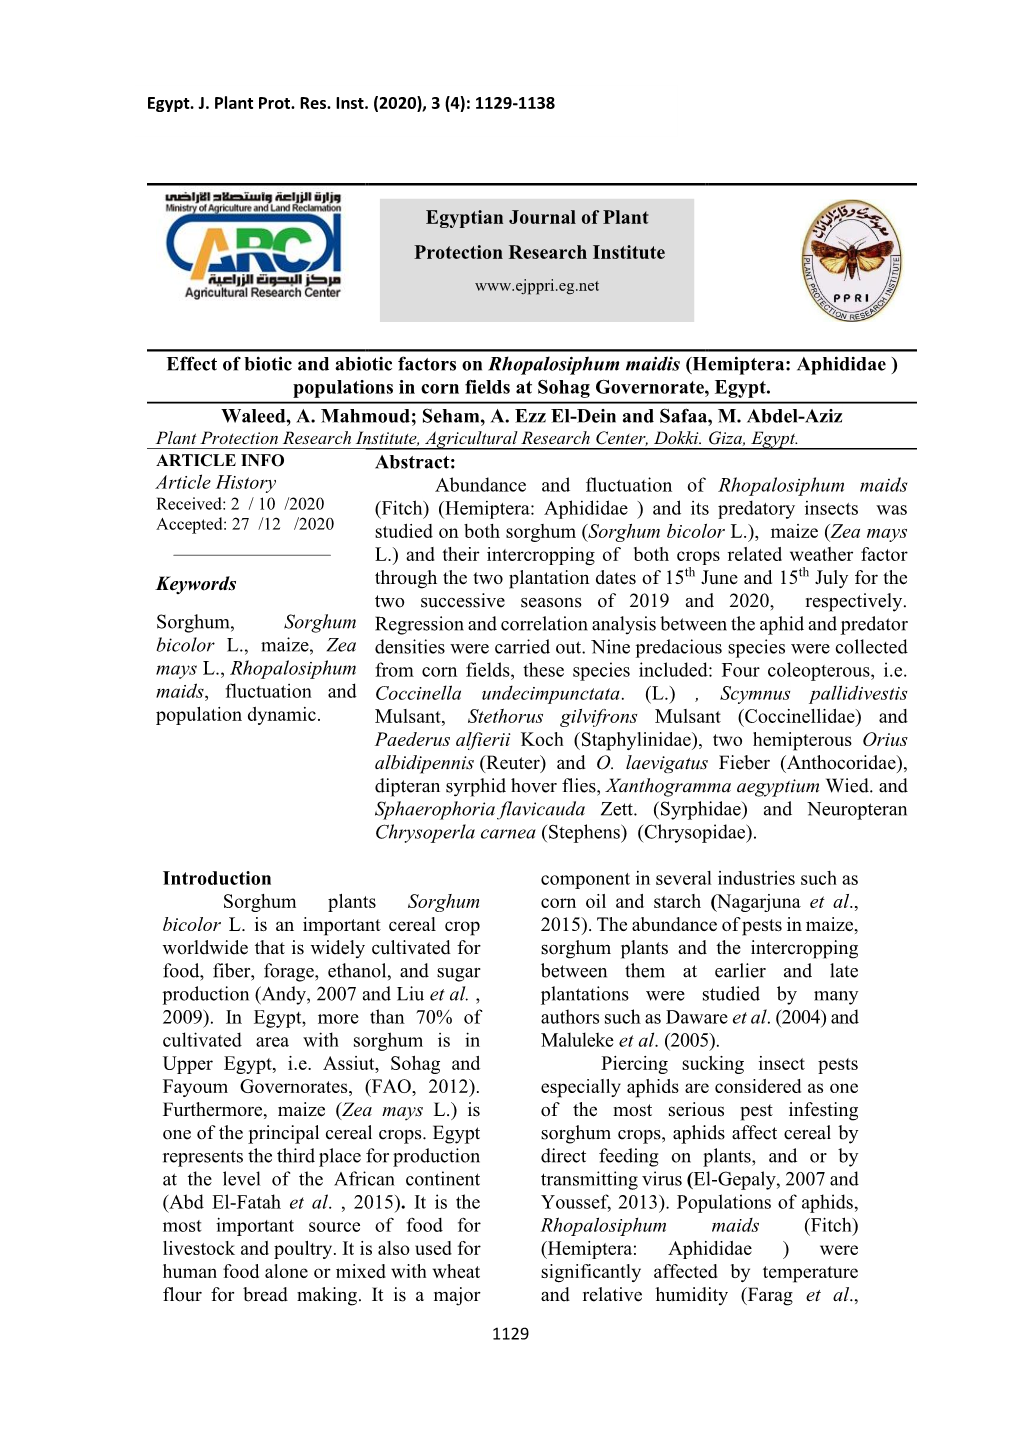 Effect of Biotic and Abiotic Factors on Rhopalosiphum Maidis (Hemiptera: Aphididae ) Populations in Corn Fields at Sohag Governorate, Egypt